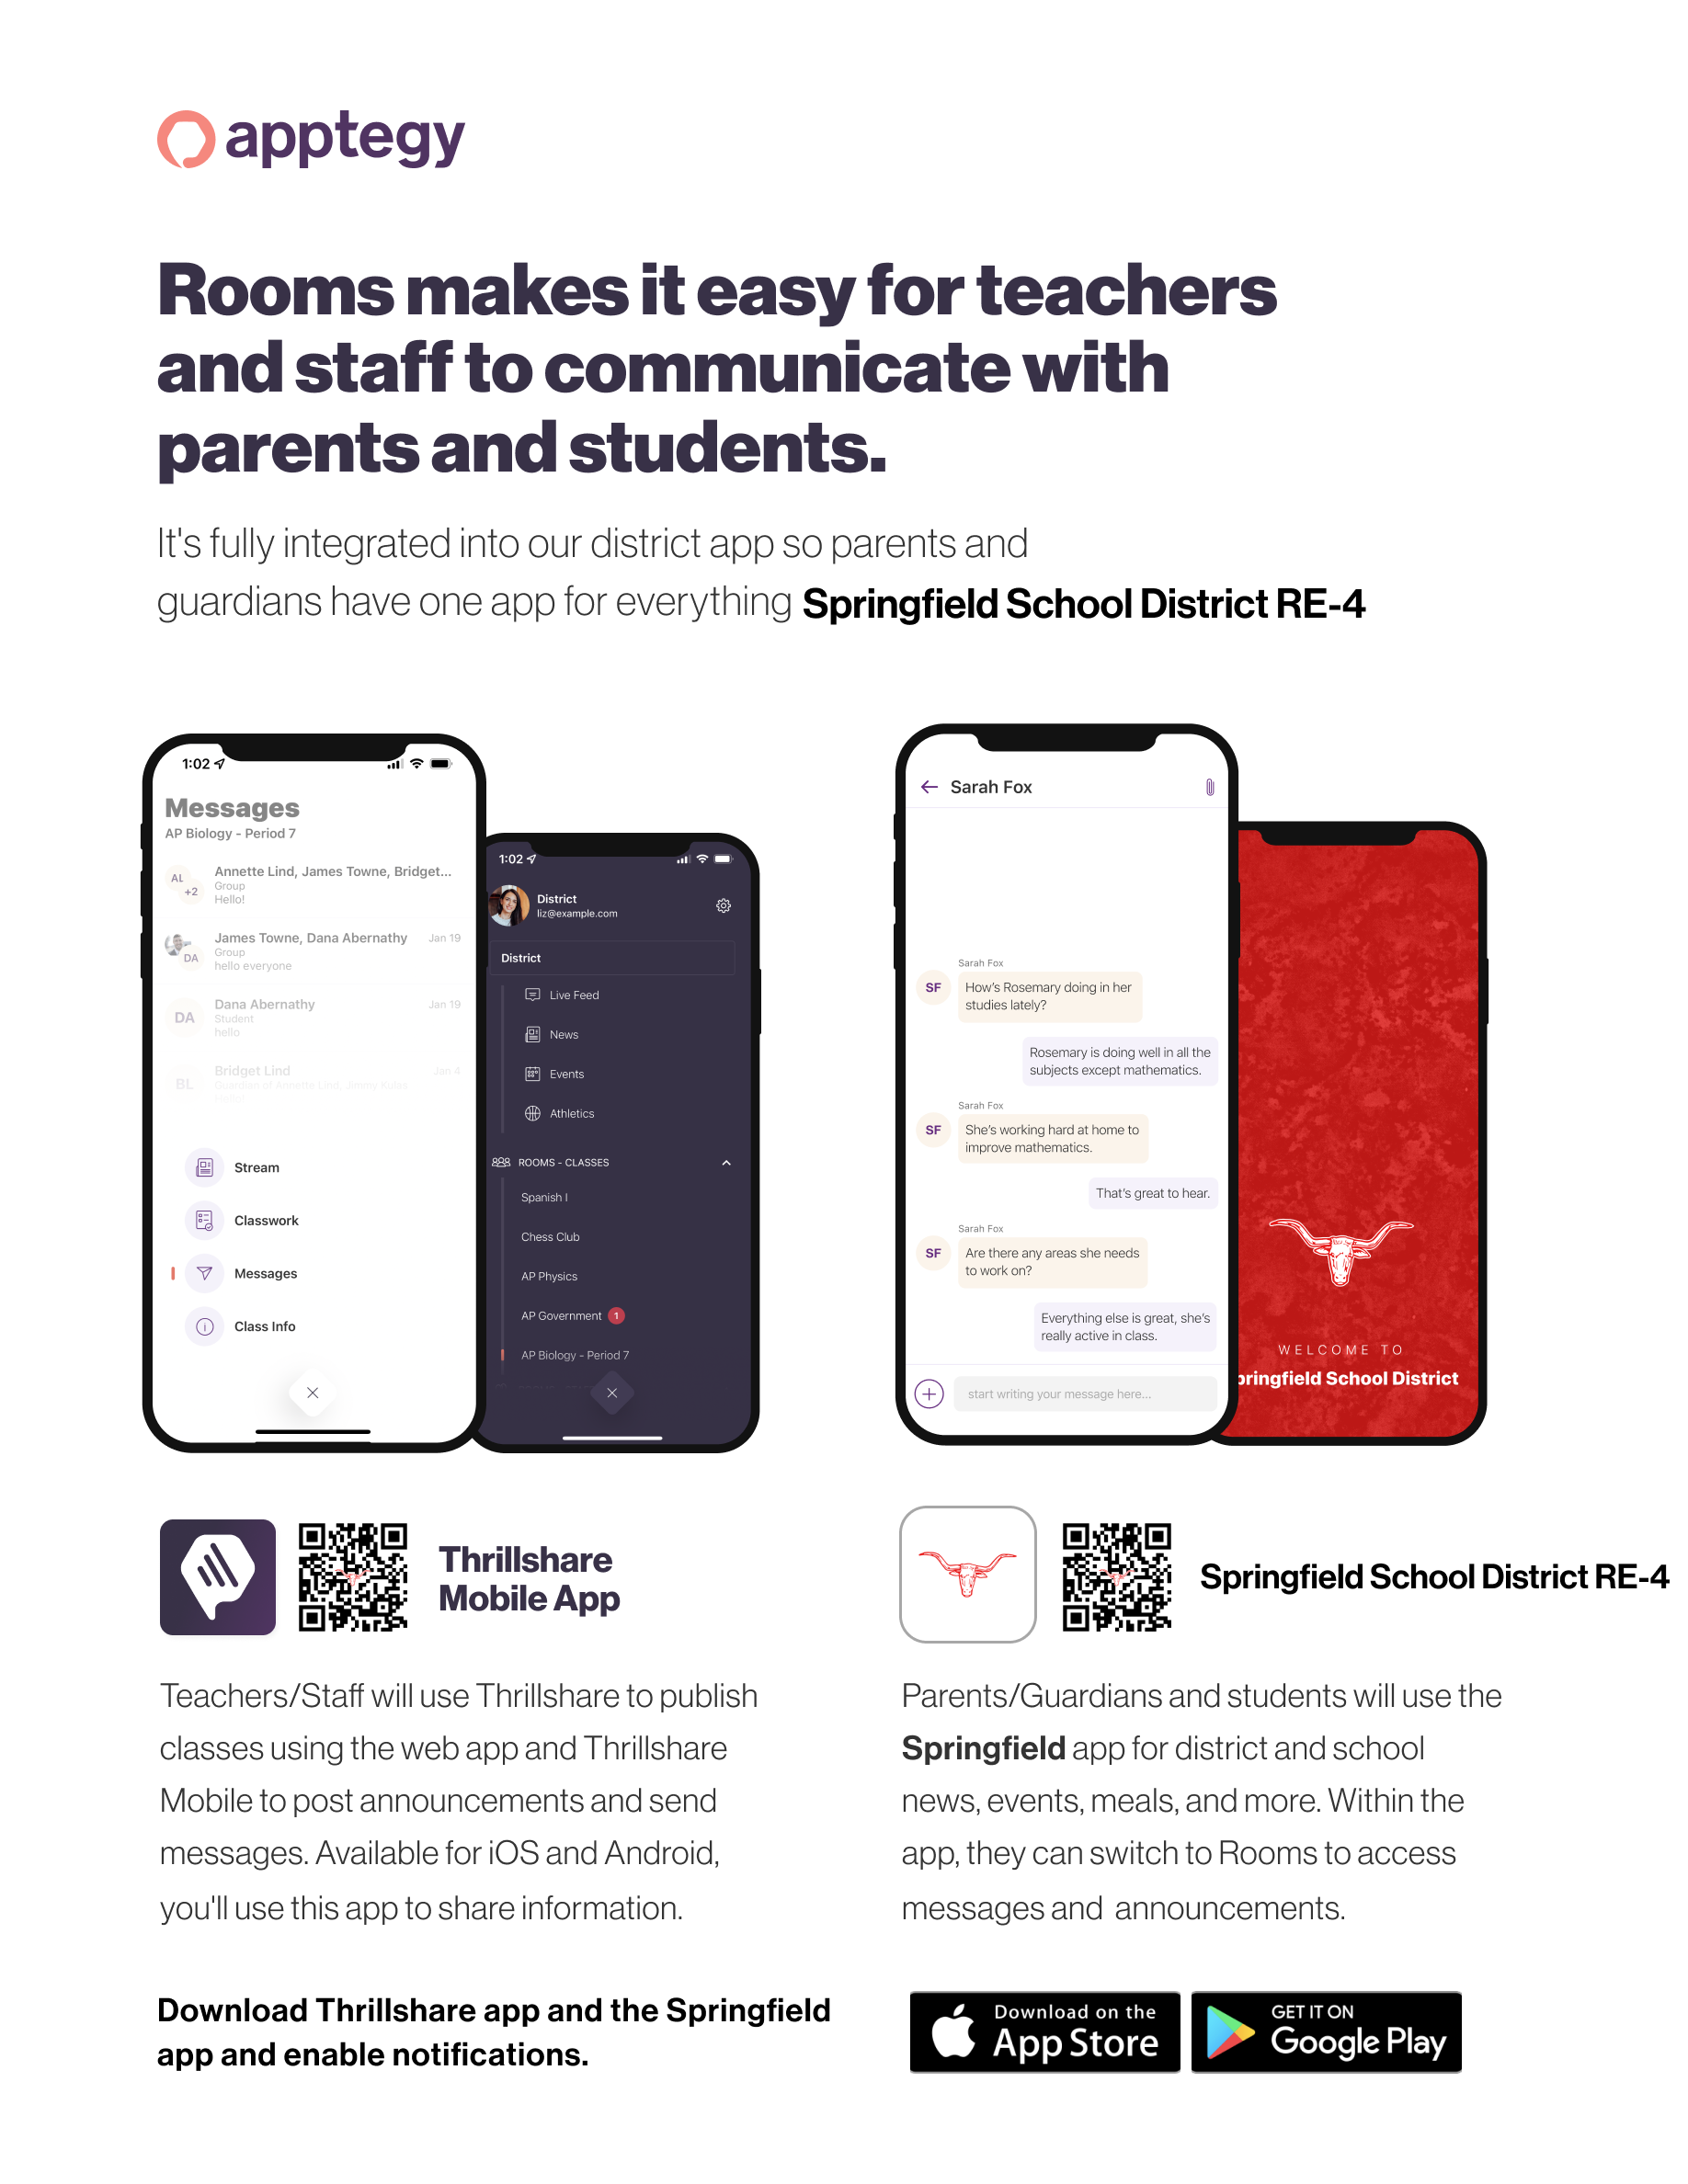 “Say hello to Parent-Teacher chat in the new Rooms app. Download the Springfield School District app in the Google Play or Apple App store.”